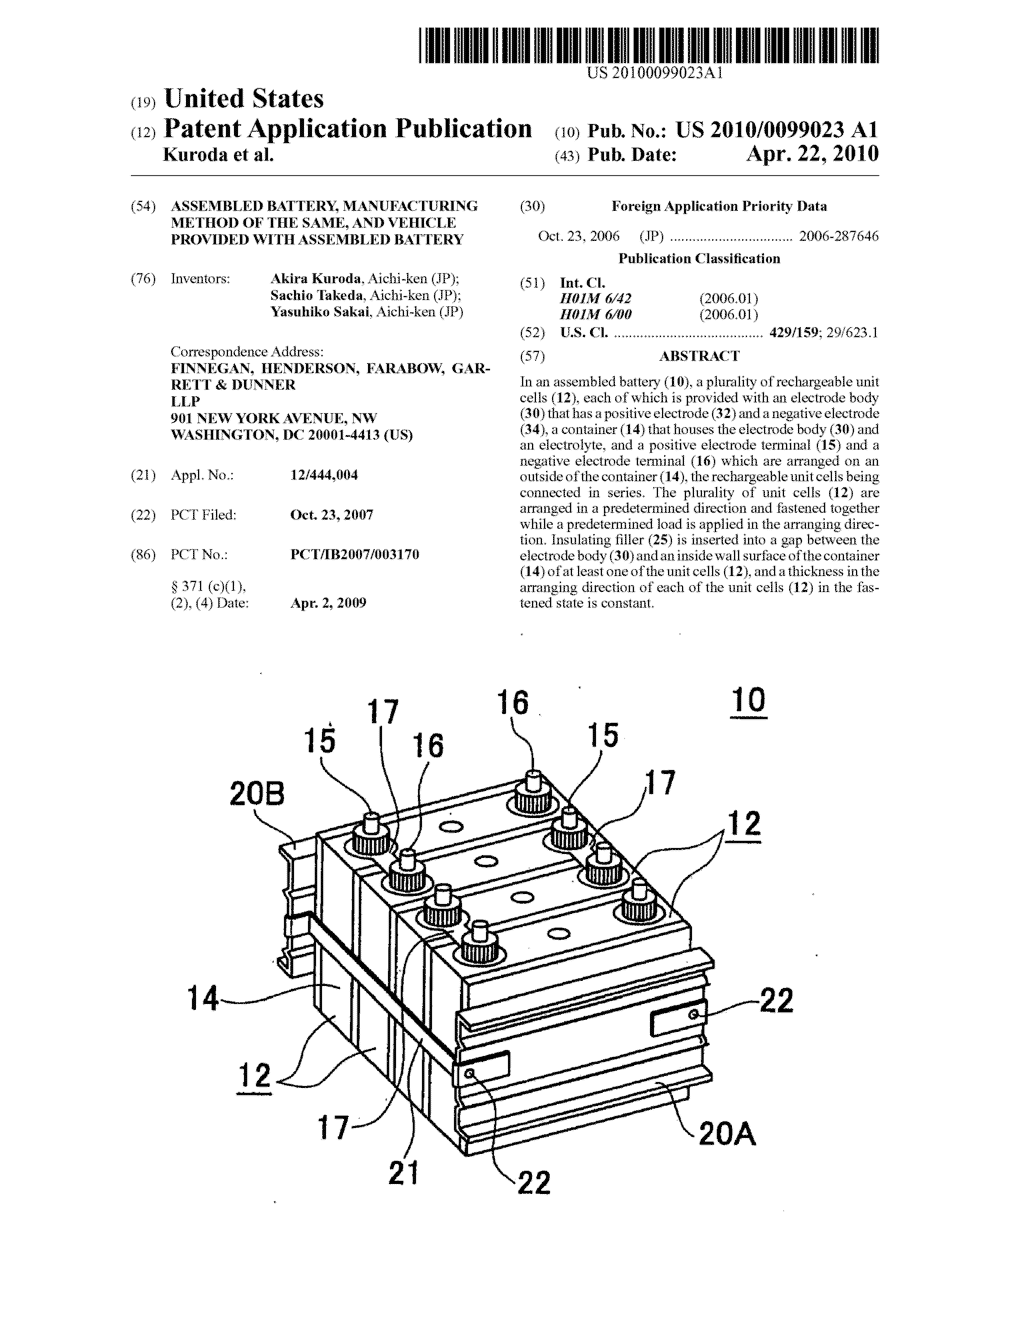 ASSEMBLED BATTERY, MANUFACTURING METHOD OF THE SAME, AND VEHICLE PROVIDED WITH ASSEMBLED BATTERY - diagram, schematic, and image 01